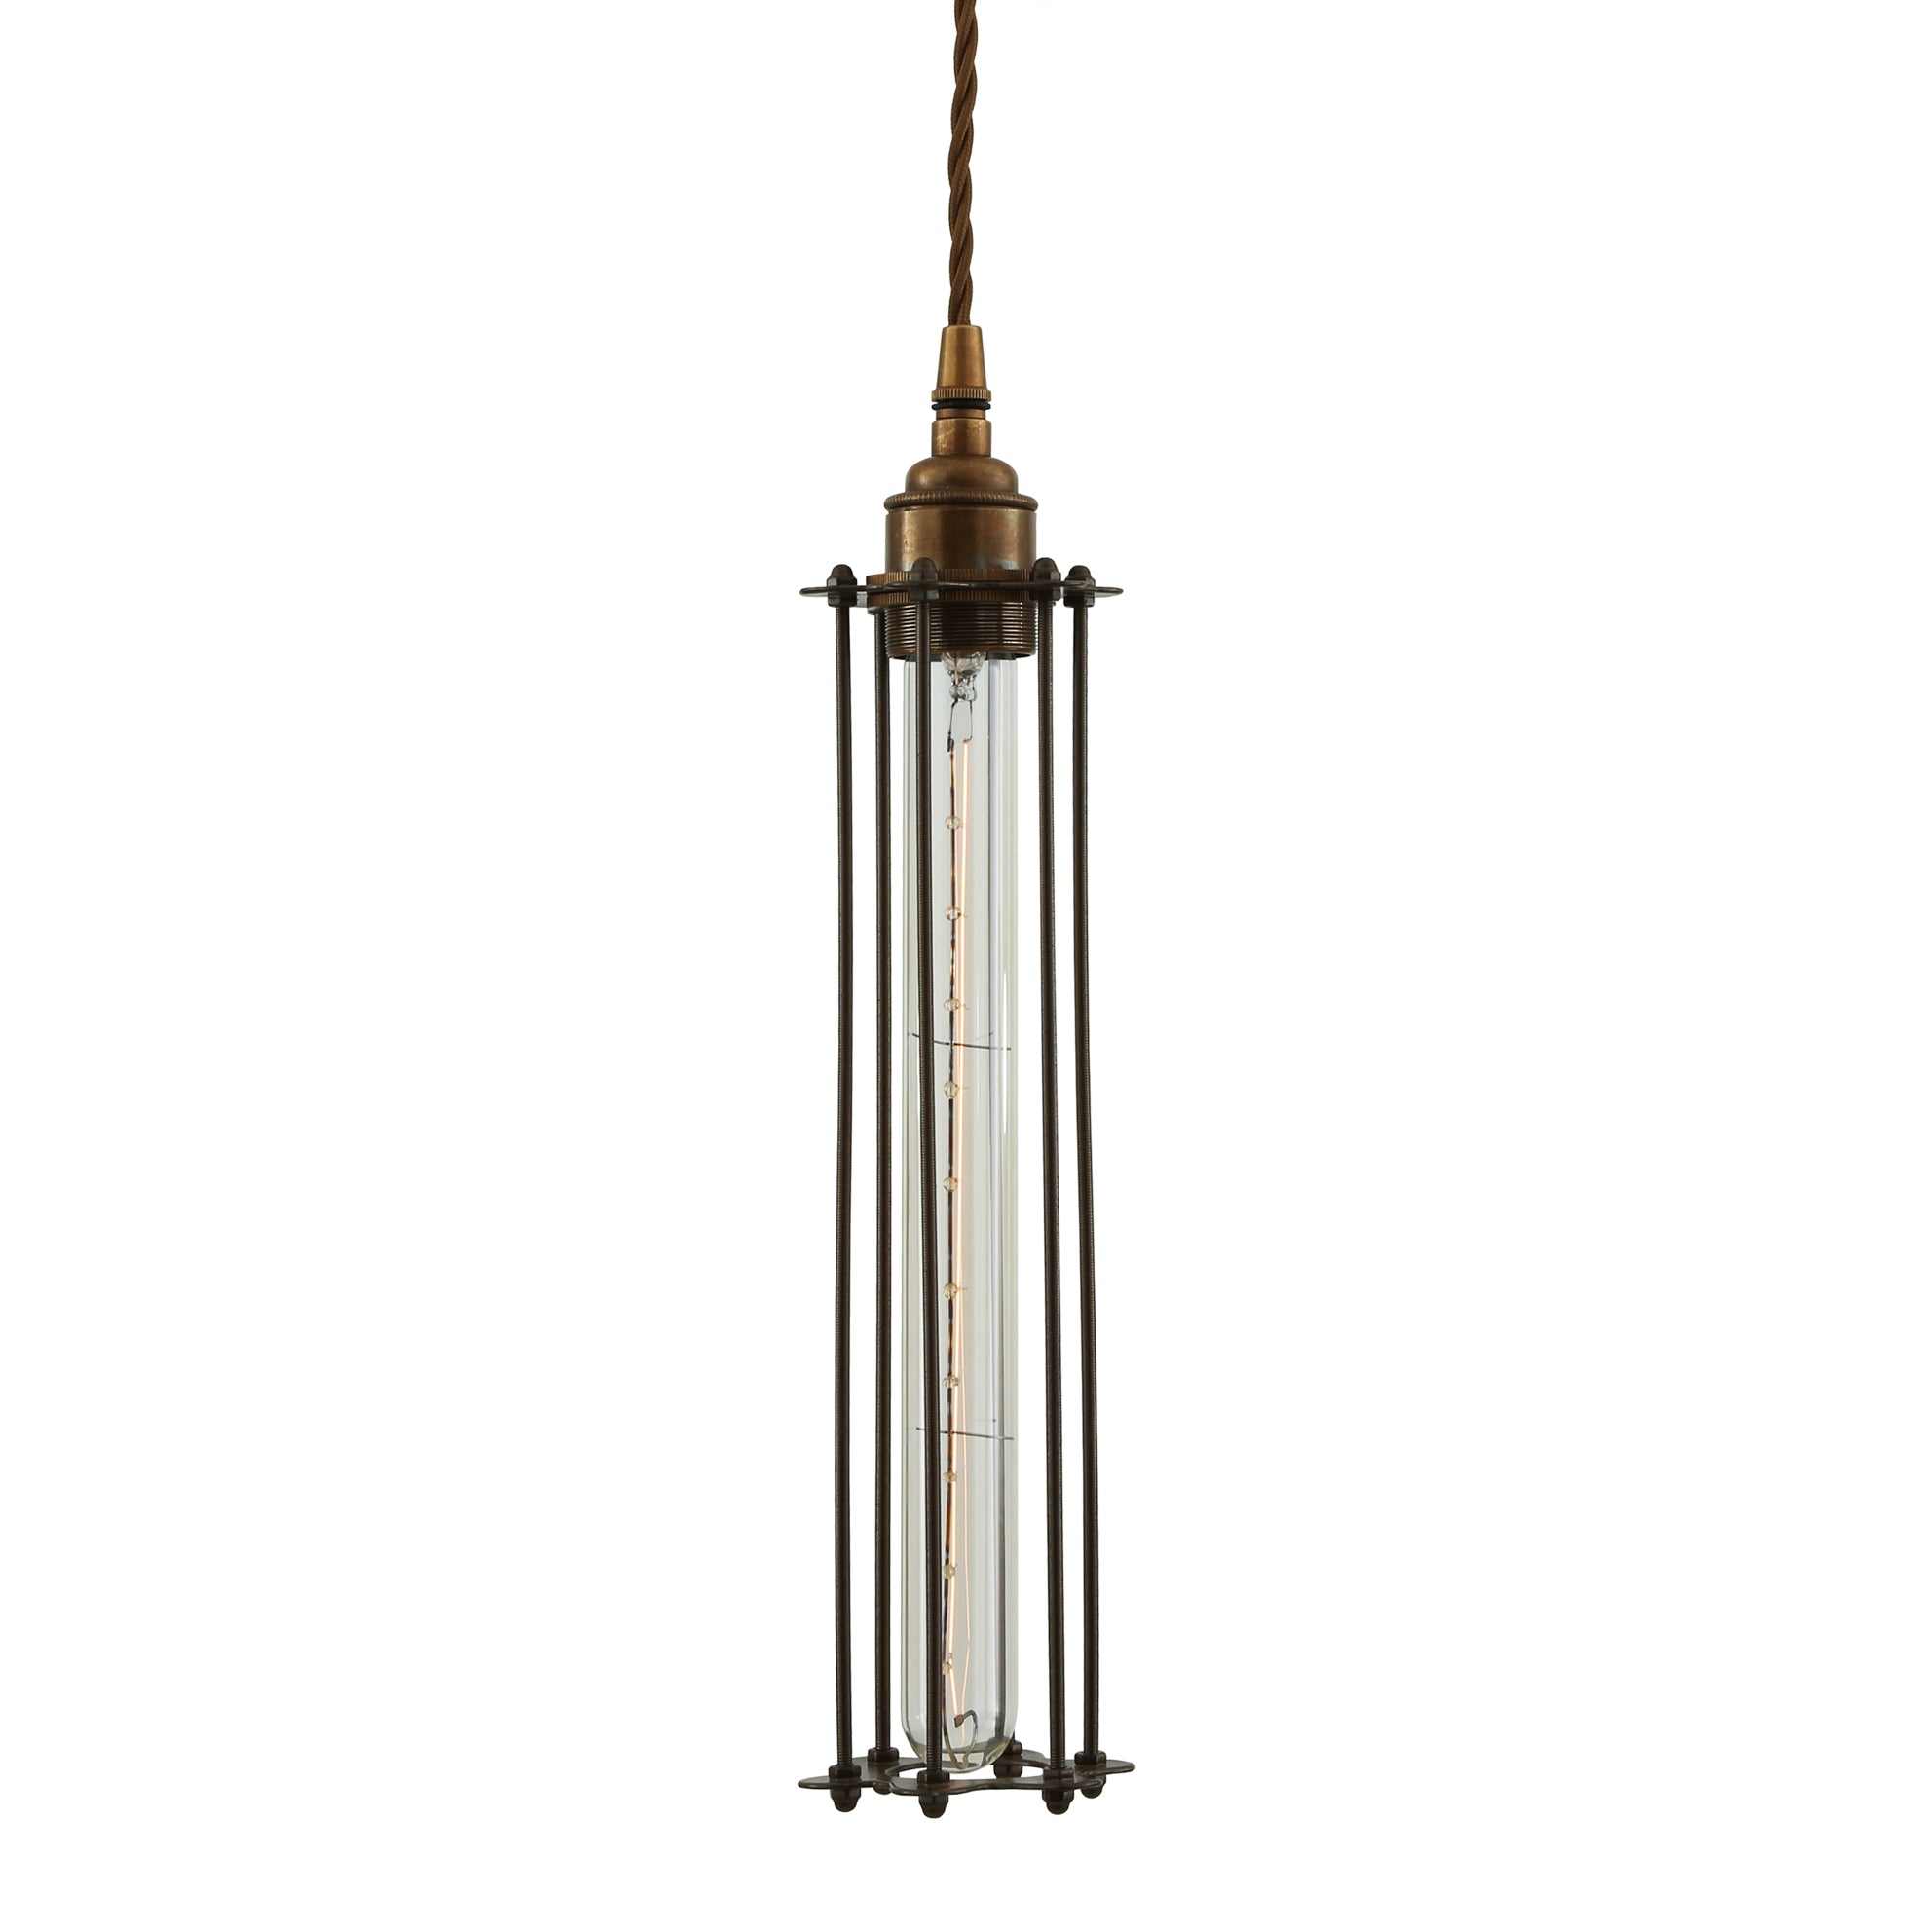 Beirut Pendant in Antique Brass with Bronze Cage